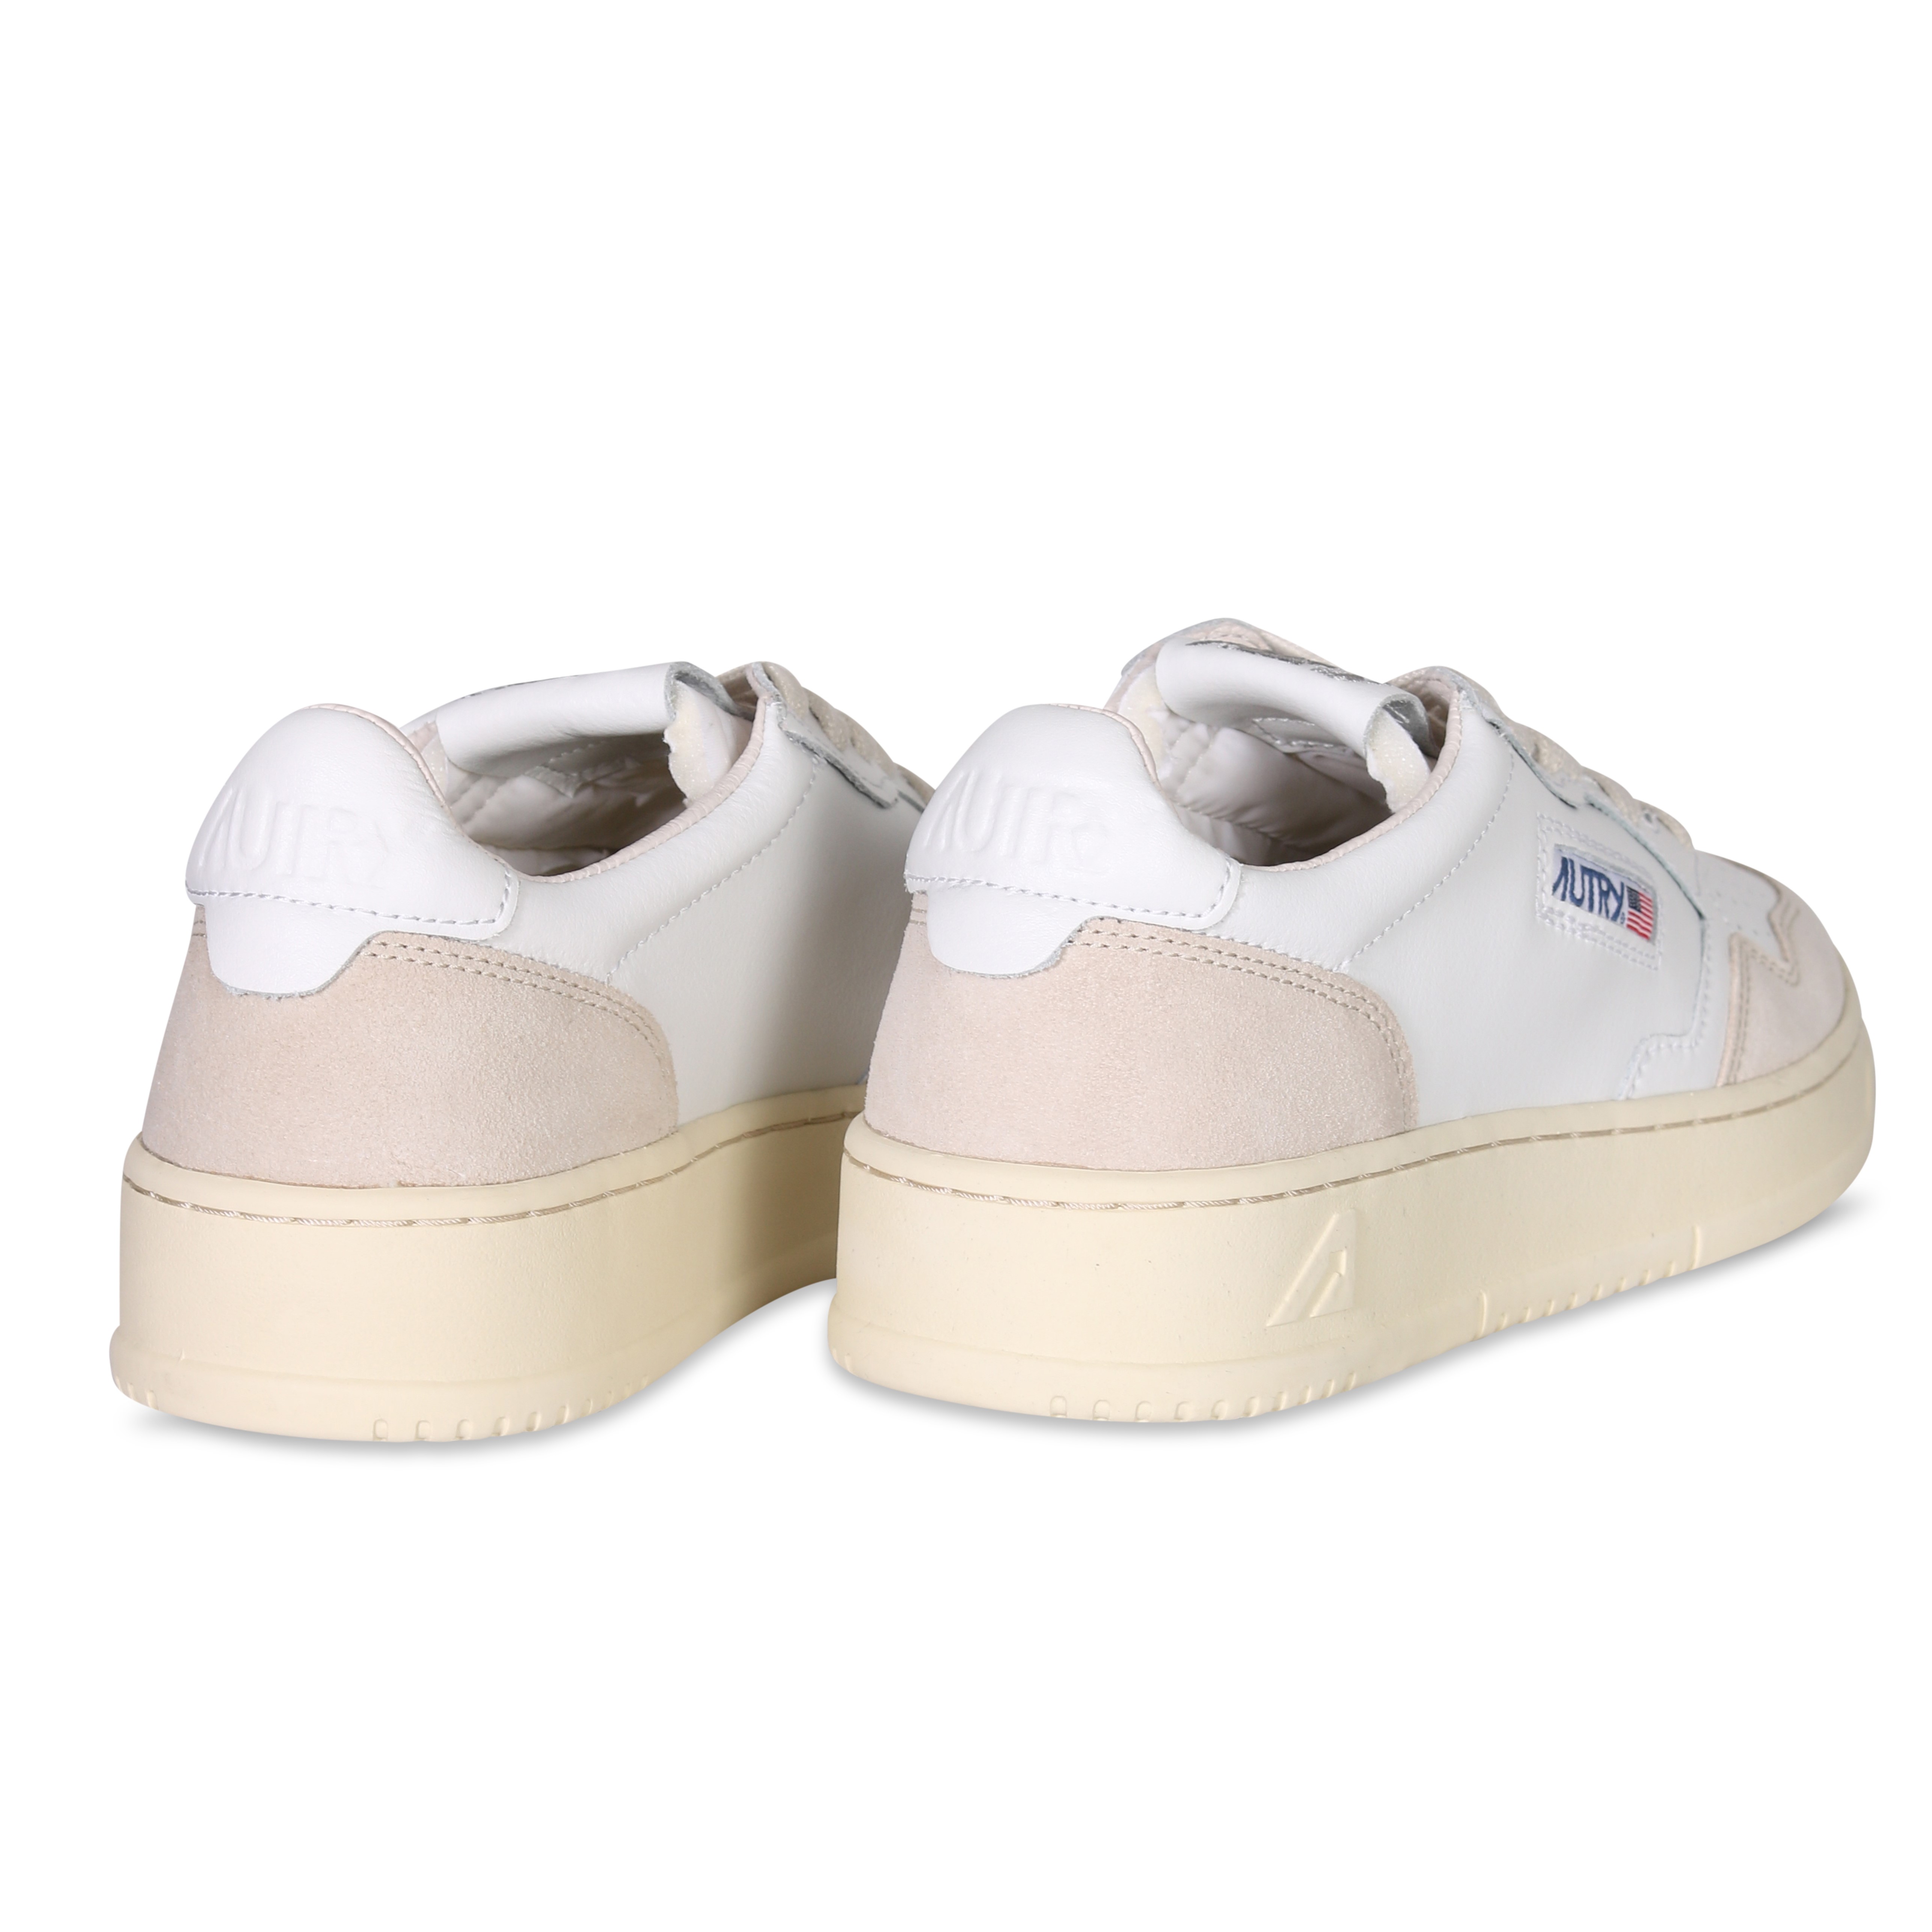 Autry Action Shoes Vintage White/ Suede